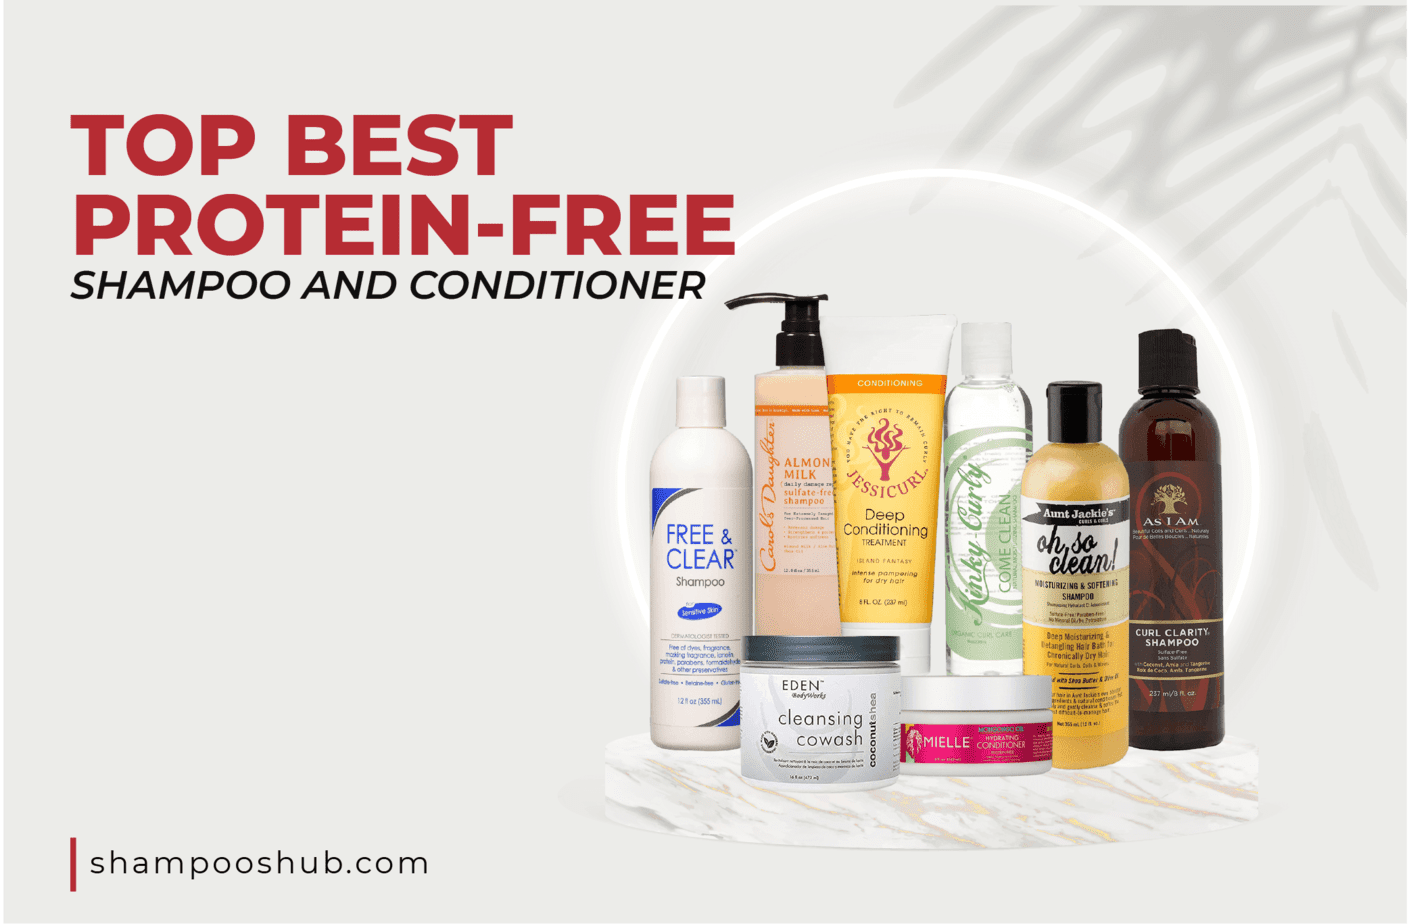 Best Protein-free Shampoo And Conditioner